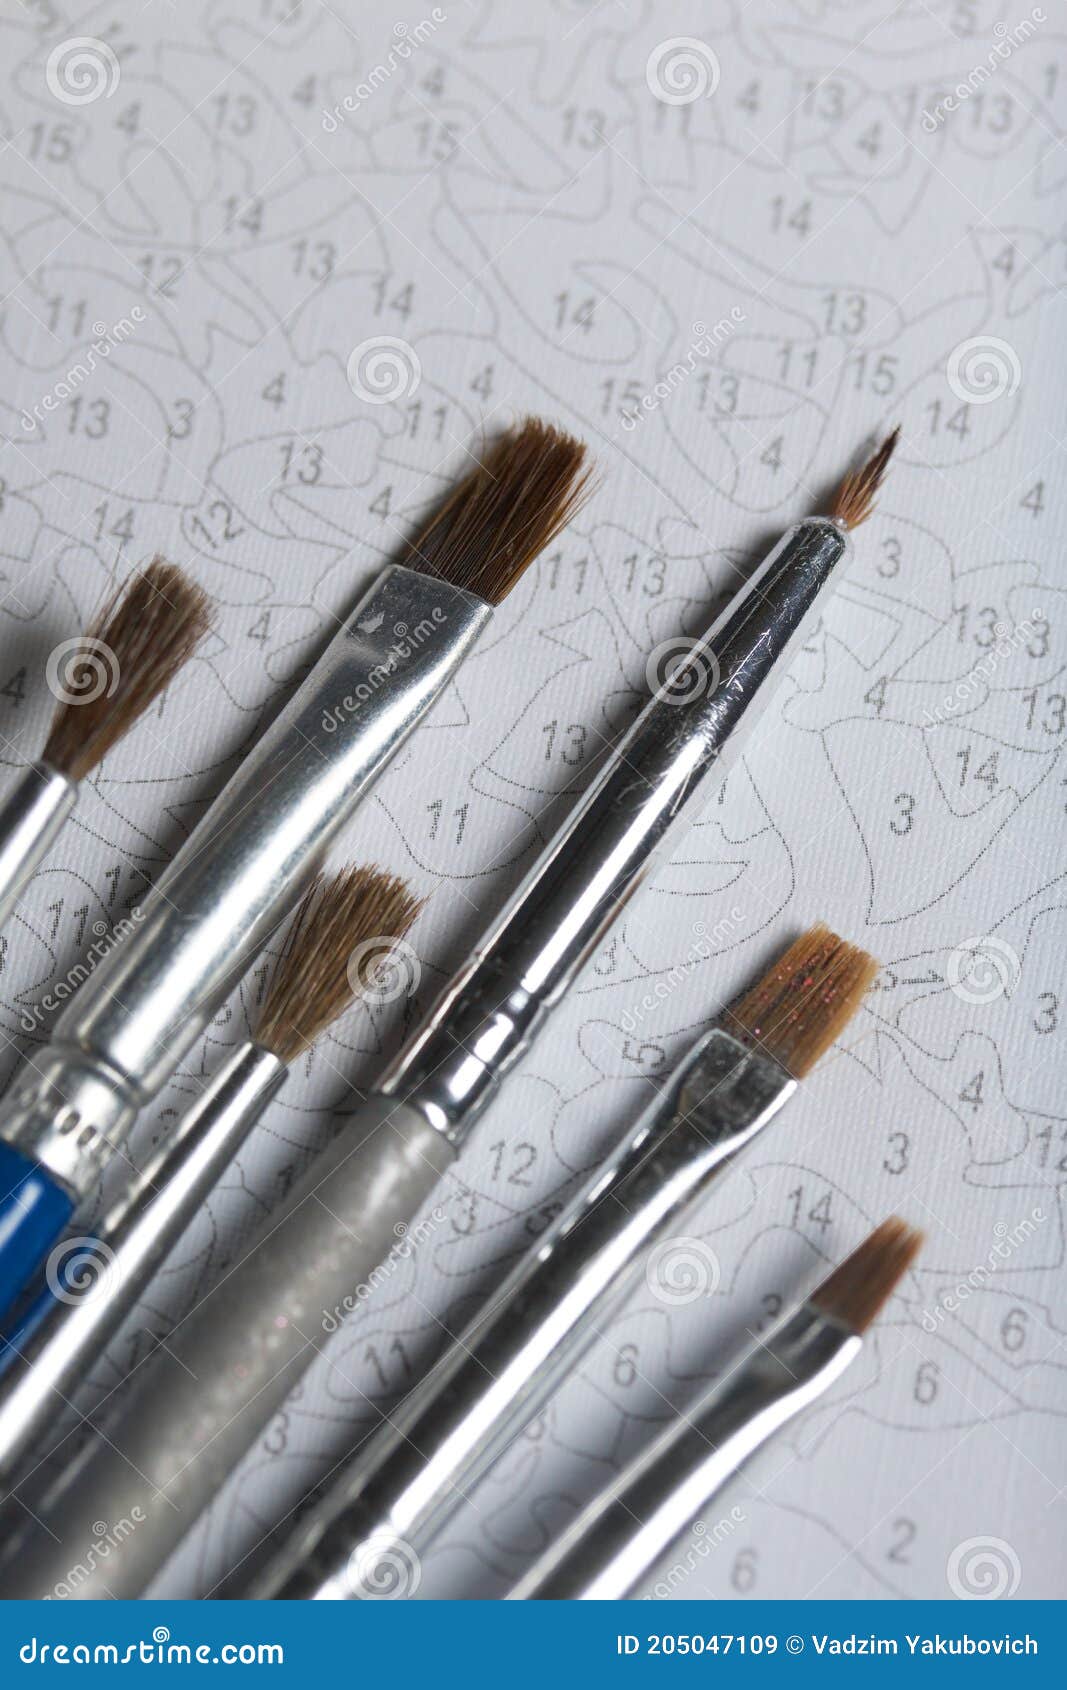 paint-brushes-on-canvas-with-numbered-sections-stock-image-image-of